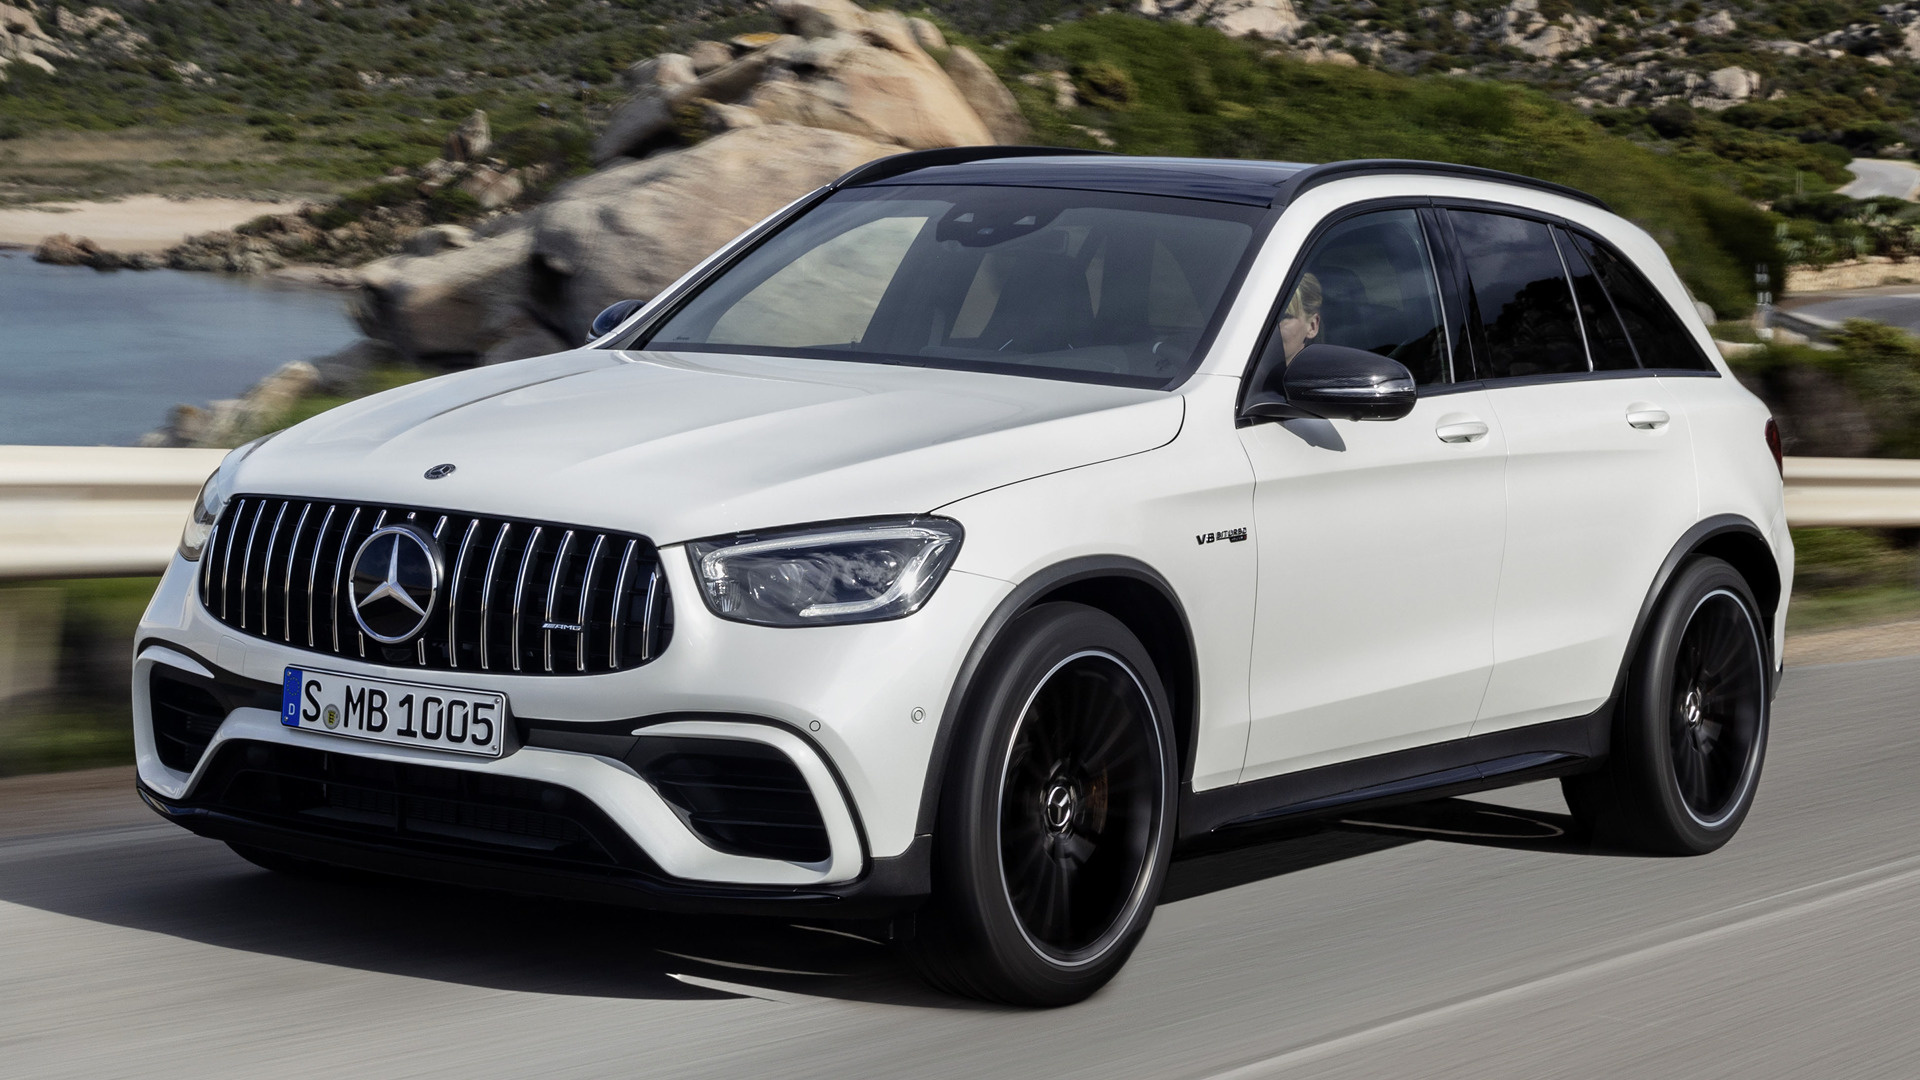 2019 Mercedes-AMG GLC 63 S - Wallpapers and HD Images | Car Pixel